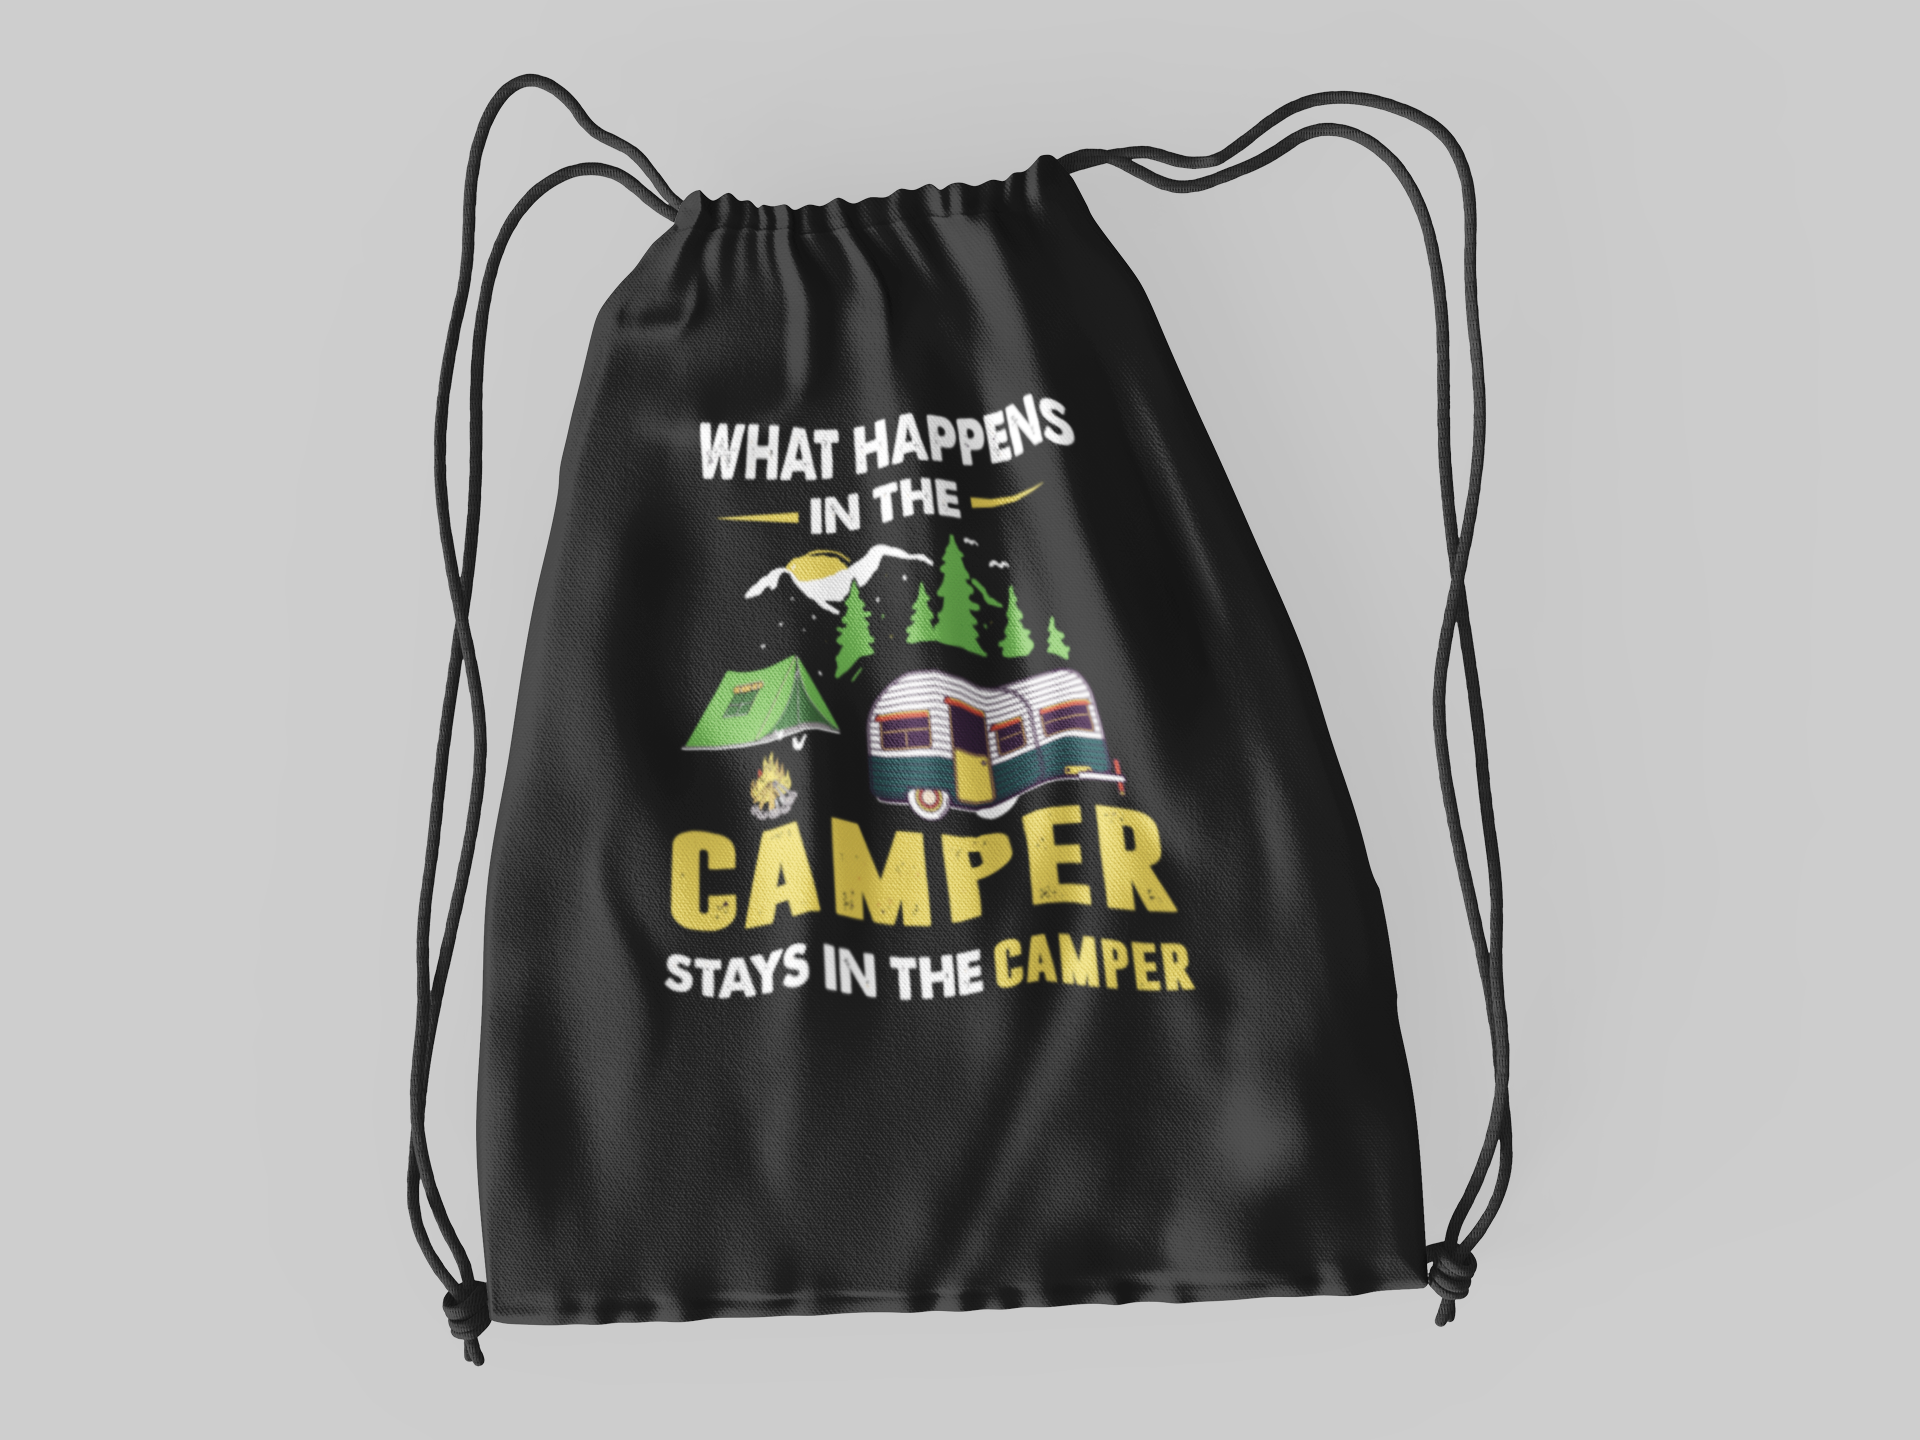 What happens stays in camper ; 100% Cotton sheeting Dyed-to match draw cord closure